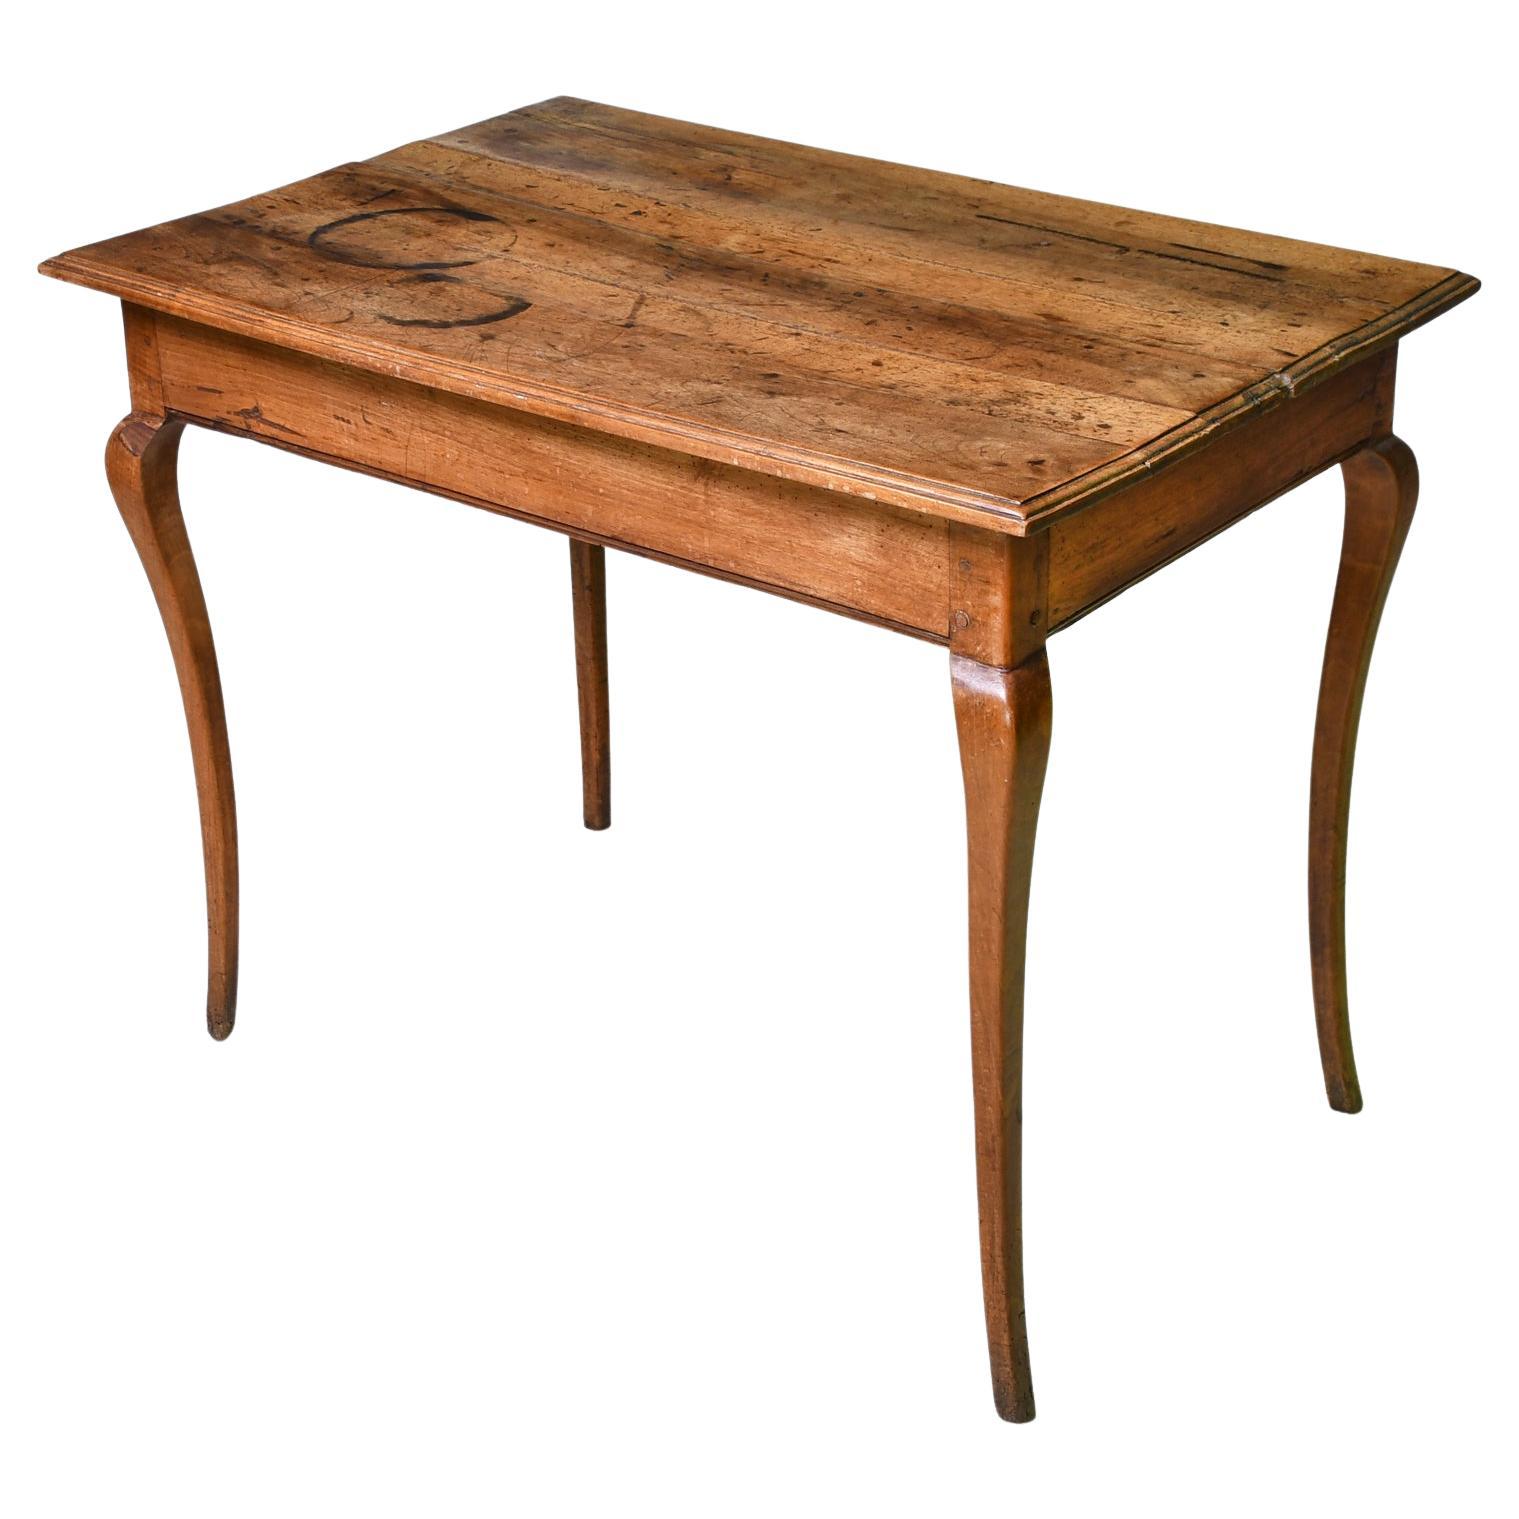 French Provincial Cherry Writing Table or Bedside Table with Drawer, circa 1800 For Sale 1